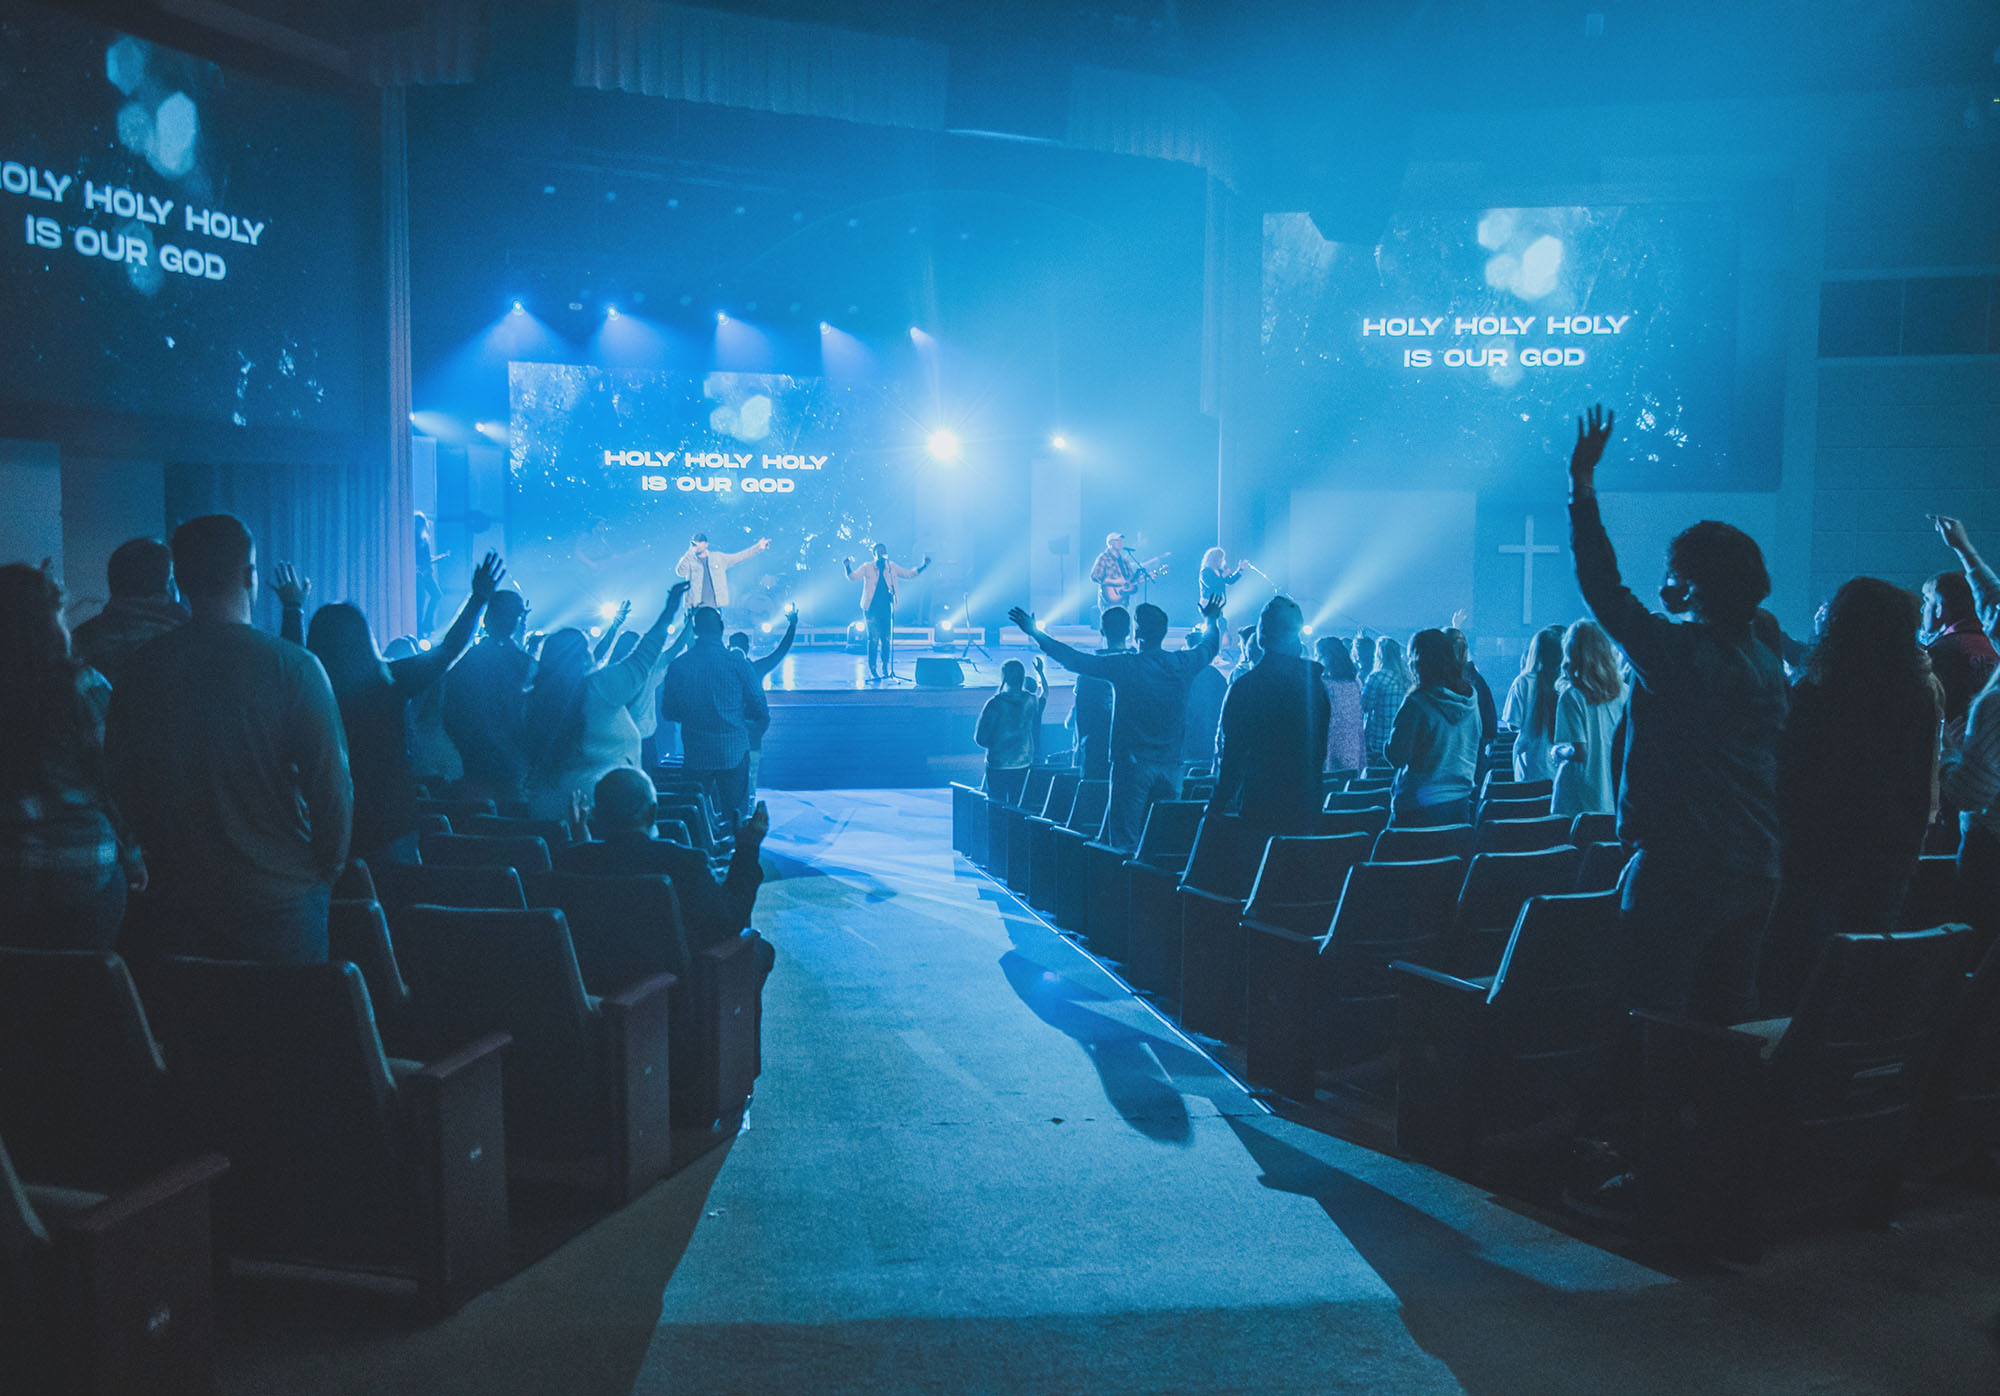 8 Valuable Resources For Anyone Running The Screens At Their Church